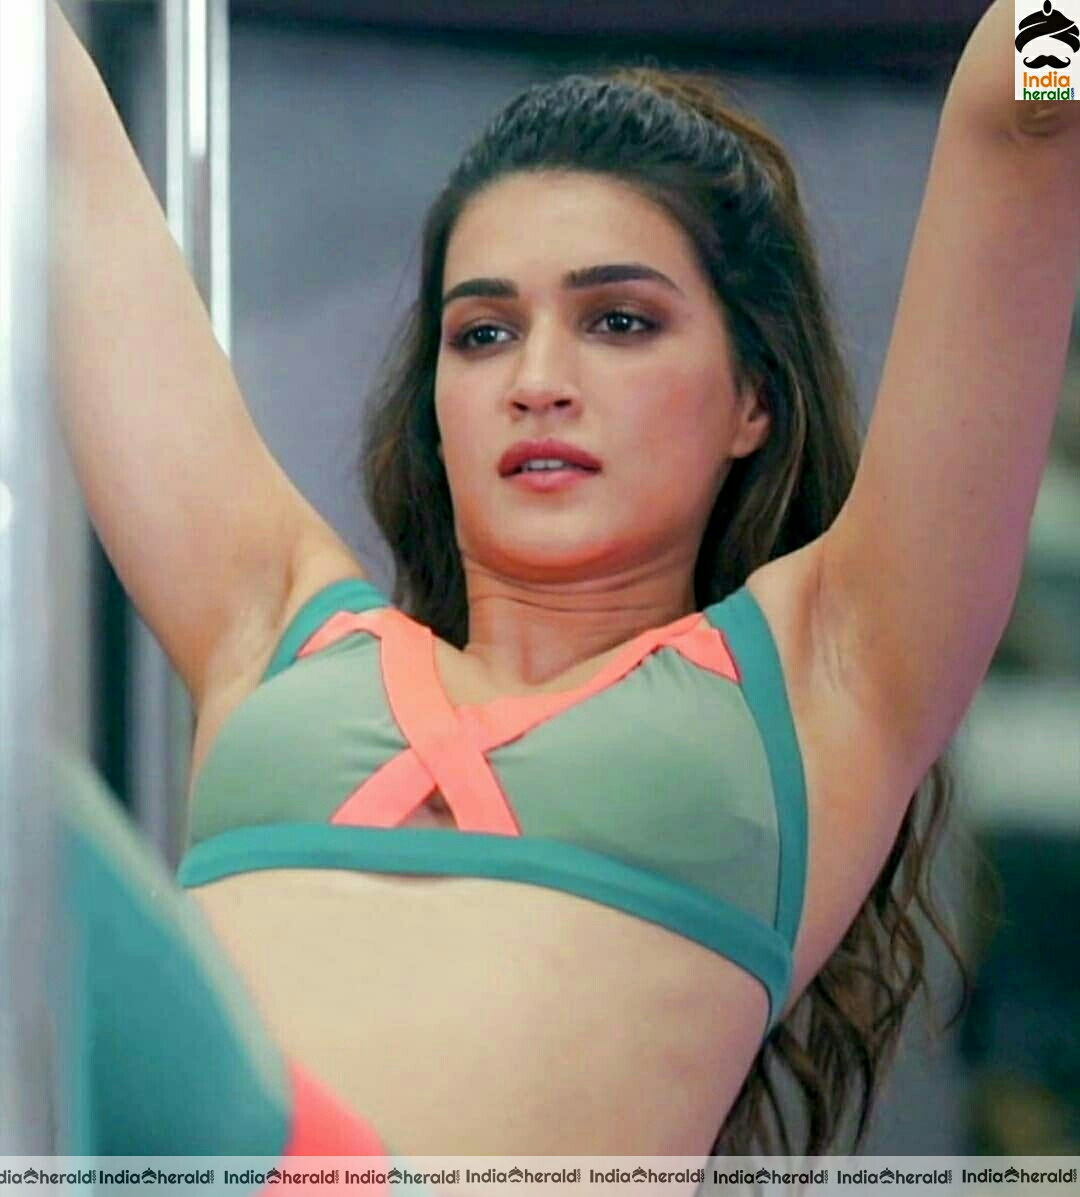 Kriti Sanon Hot In Sports Bra While Doing Workout in A Gym